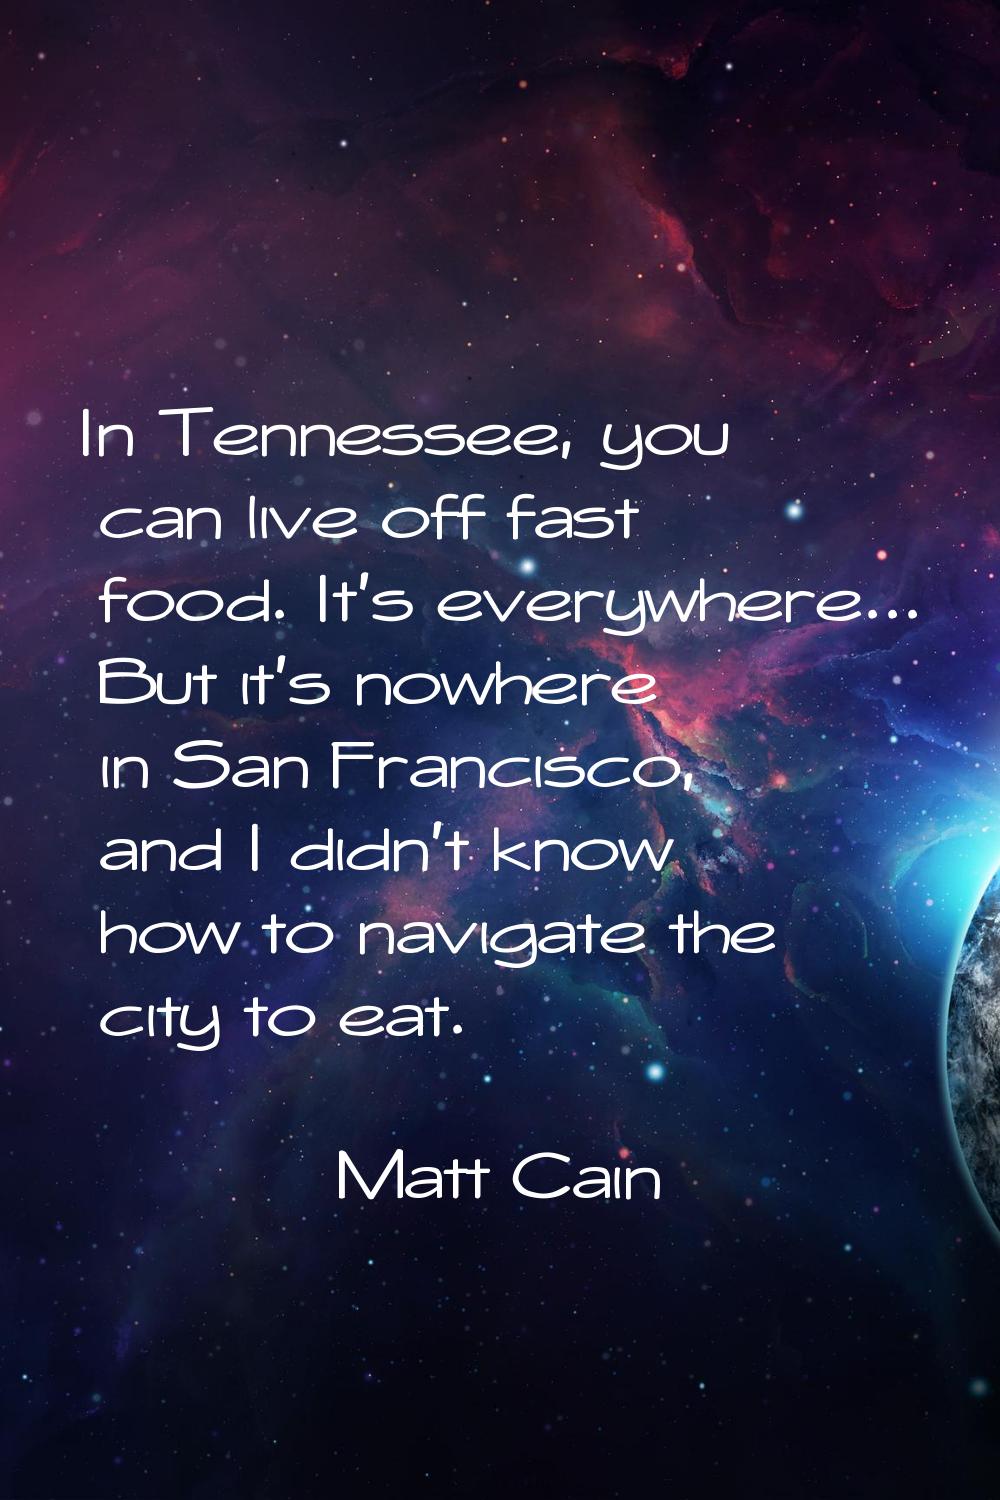 In Tennessee, you can live off fast food. It's everywhere... But it's nowhere in San Francisco, and